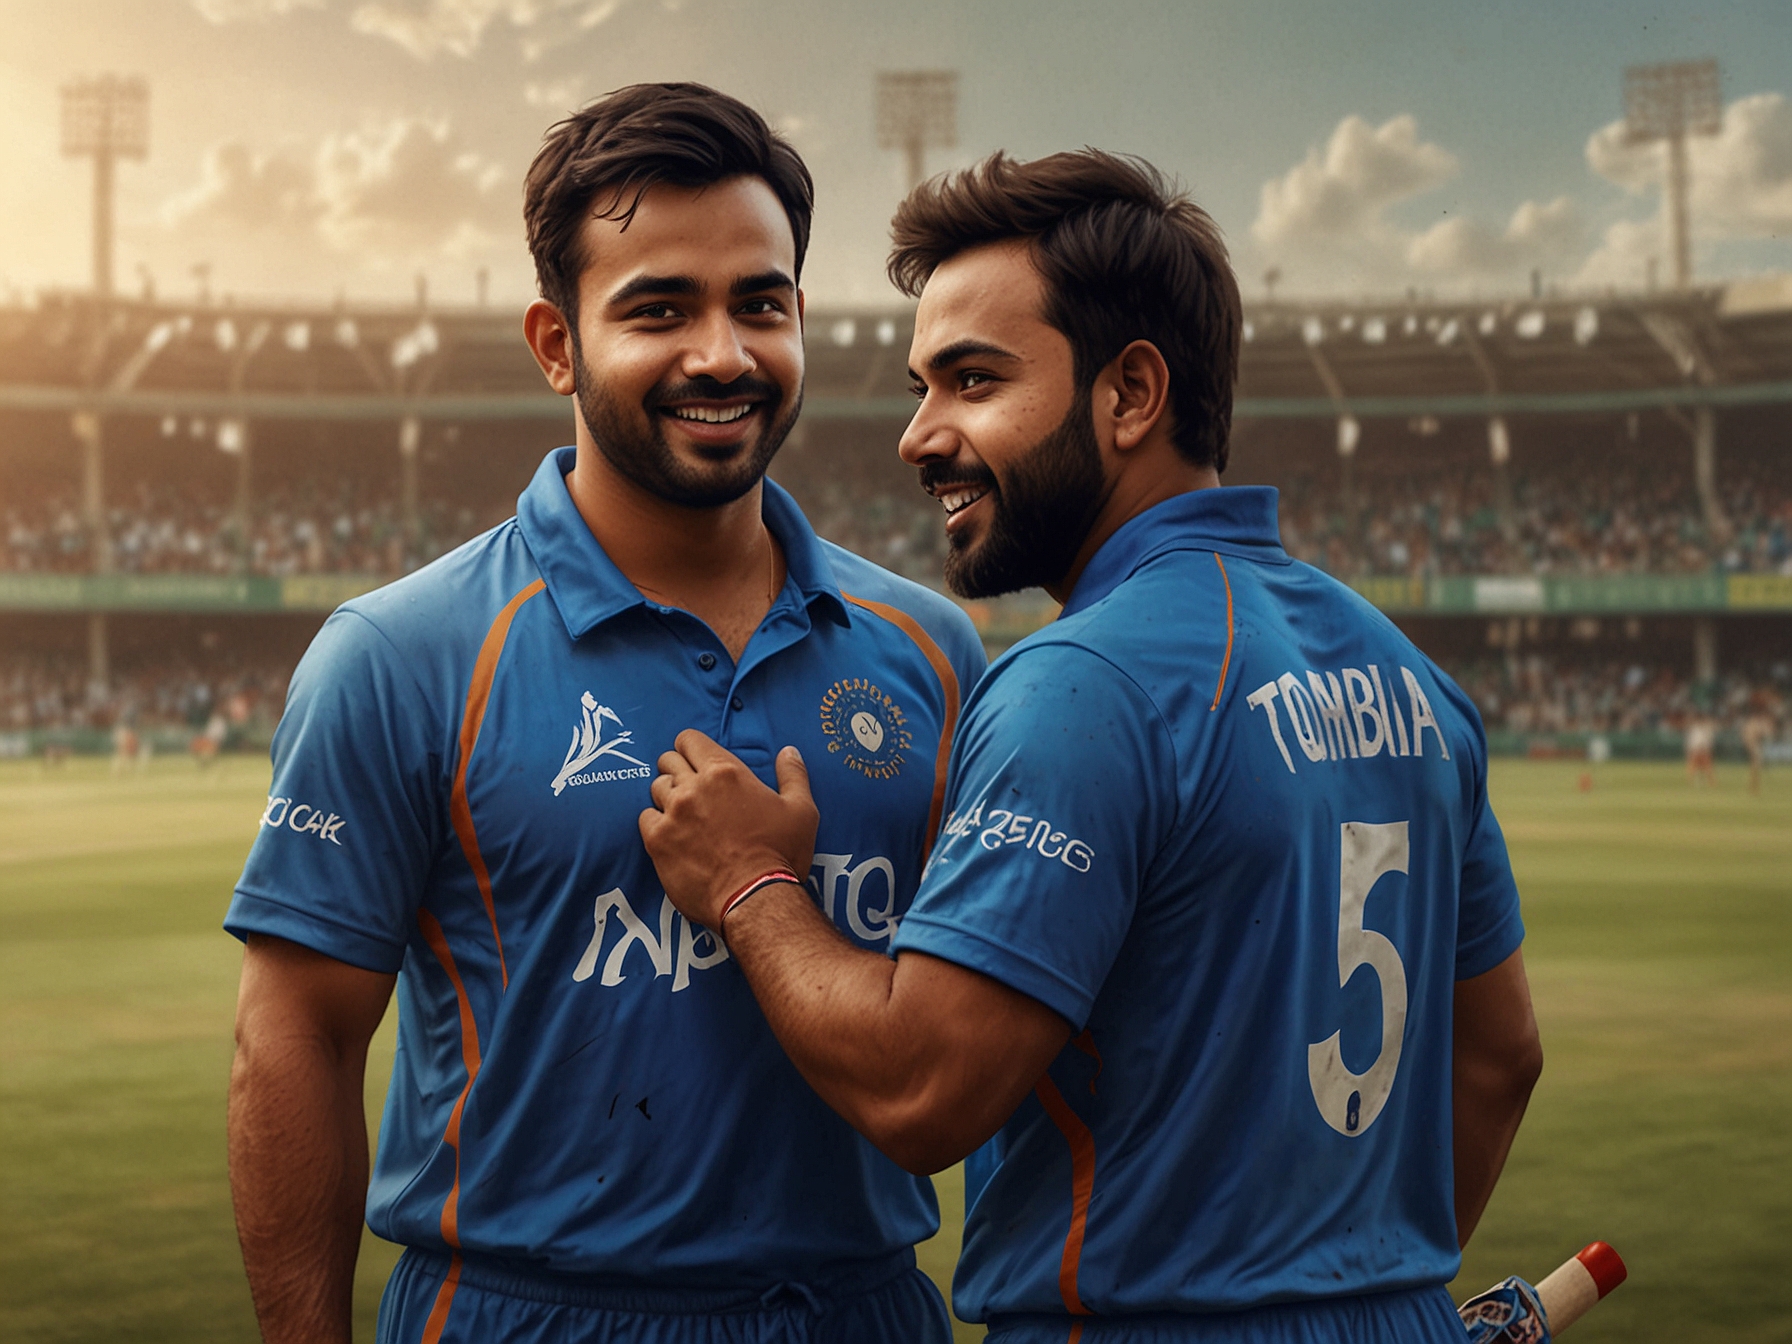 Rashid Khan and Rohit Sharma standing together, showcasing mutual respect and camaraderie, highlighting their journey and achievements in the tournament, with a cricket field in the backdrop.